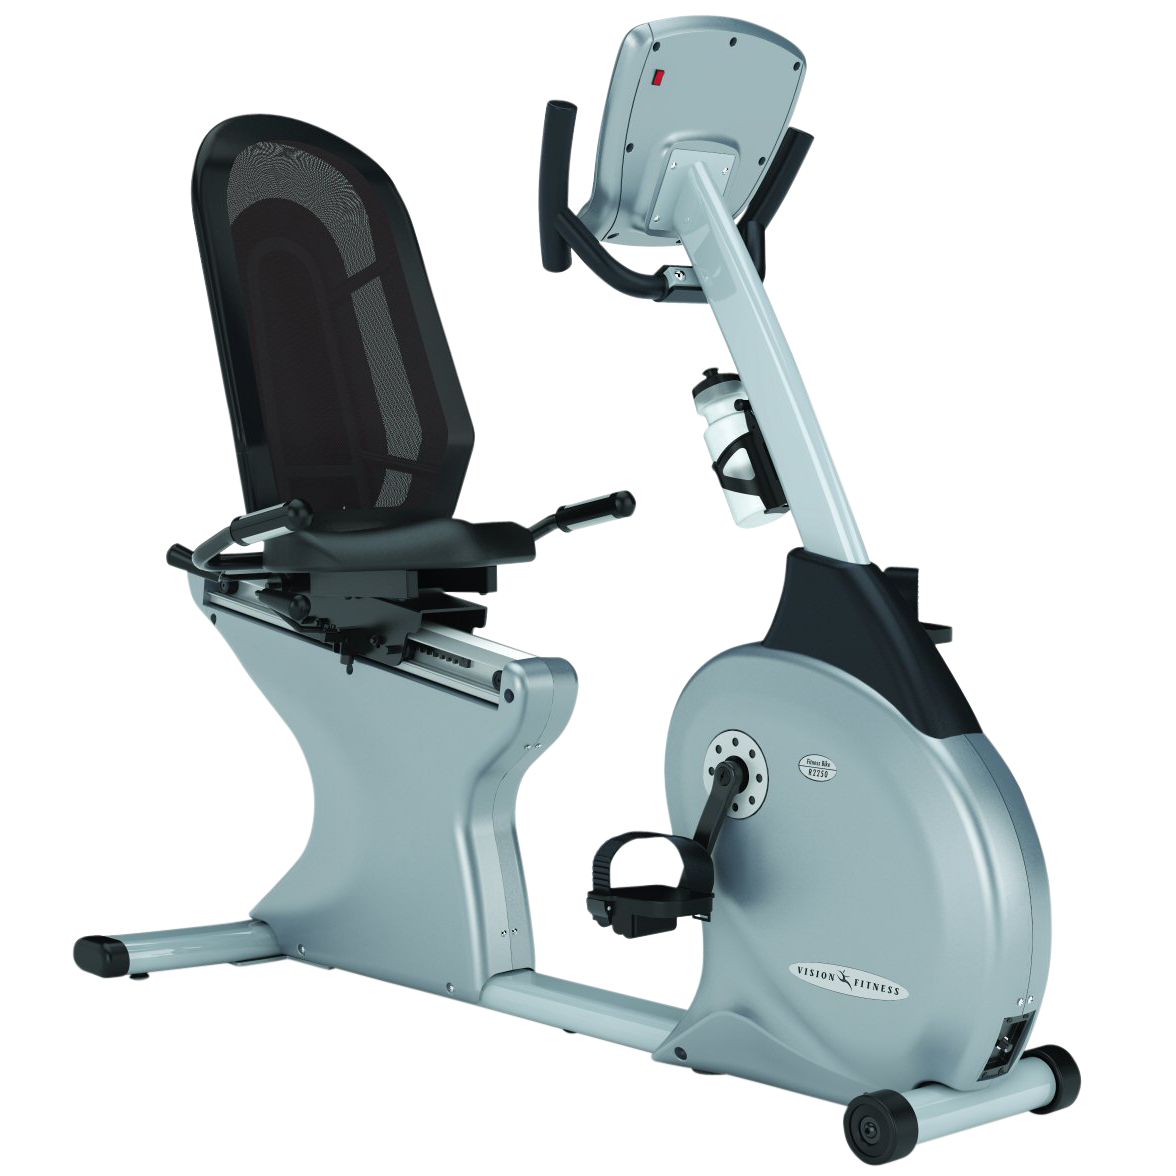 Vision Fitness R2250 Recumbent Exercise Bike with Simple Console at John Lewis